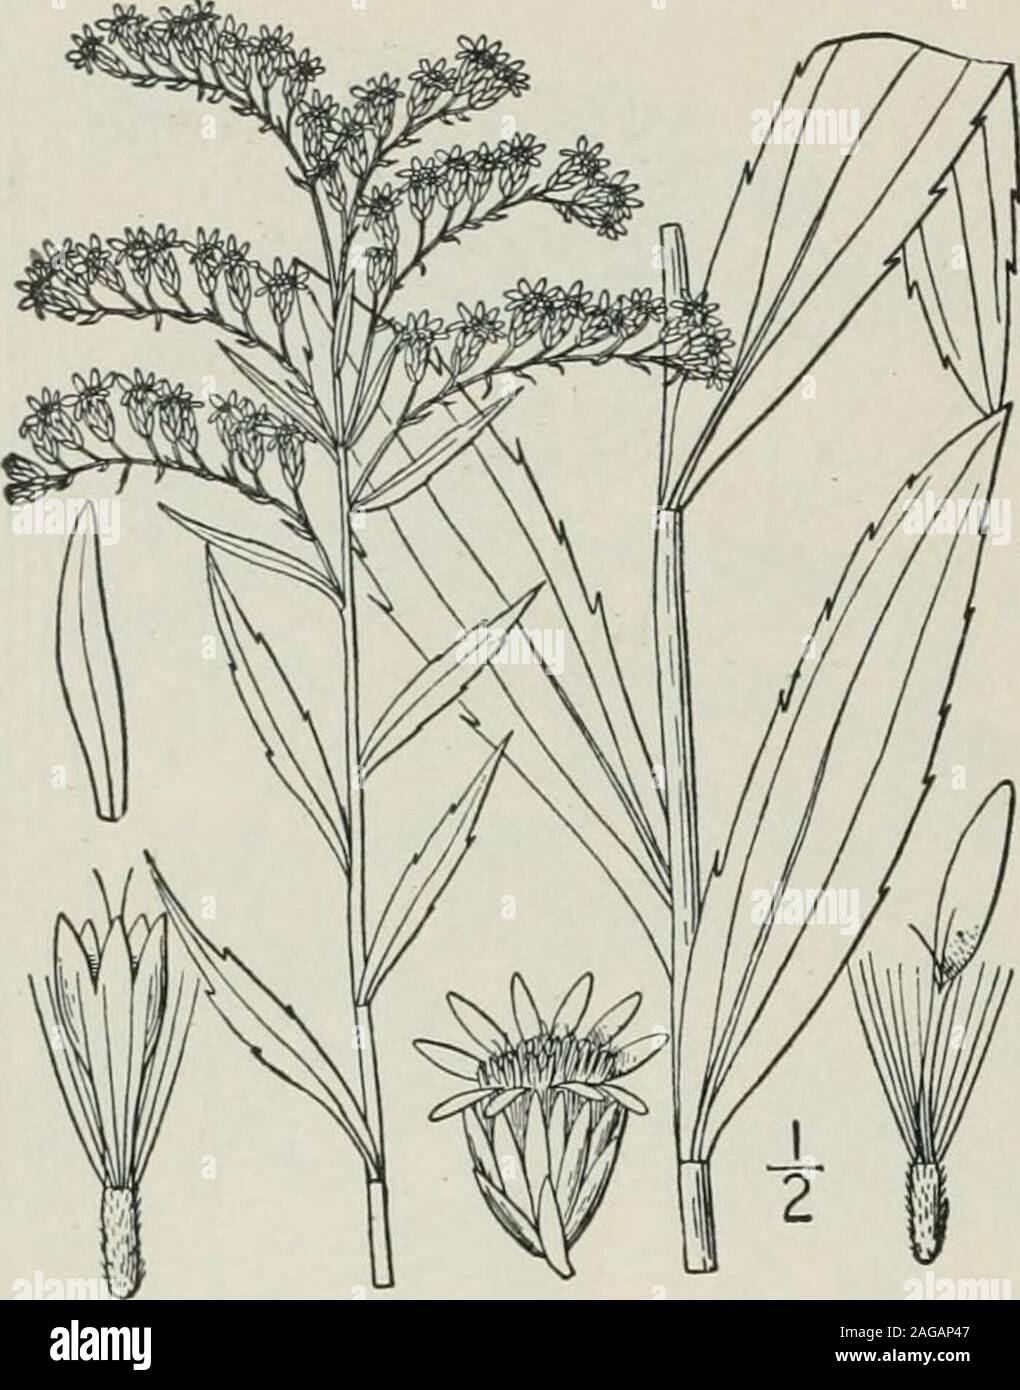 . An illustrated flora of the northern United States, Canada and the British possessions : from Newfoundland to the parallel of the southern boundary of Virginia and from the Atlantic Ocean westward to the 102nd meridian. 394 COMPOSITAE. Vol. III.. 37. Solidago serotina Ait. Late Golden-rod. Fig. 4249. Solidago serotina Ait. Hort. Kew. 3: 211. 1789. 5. gigantea Ait. Hort. Kew. 3: 211. 1789. Solidago Pitcheri Nutt. Journ. Acad. Phil. 7: loi. 1834.5. serotina gigantea A. Gray, Proc. Am. Acad. 17: 180. 1882. Stem stout, 3°-8° high, glabrous, sometimesglaucous. Leaves lanceolate or oblong-lanceo-l Stock Photo